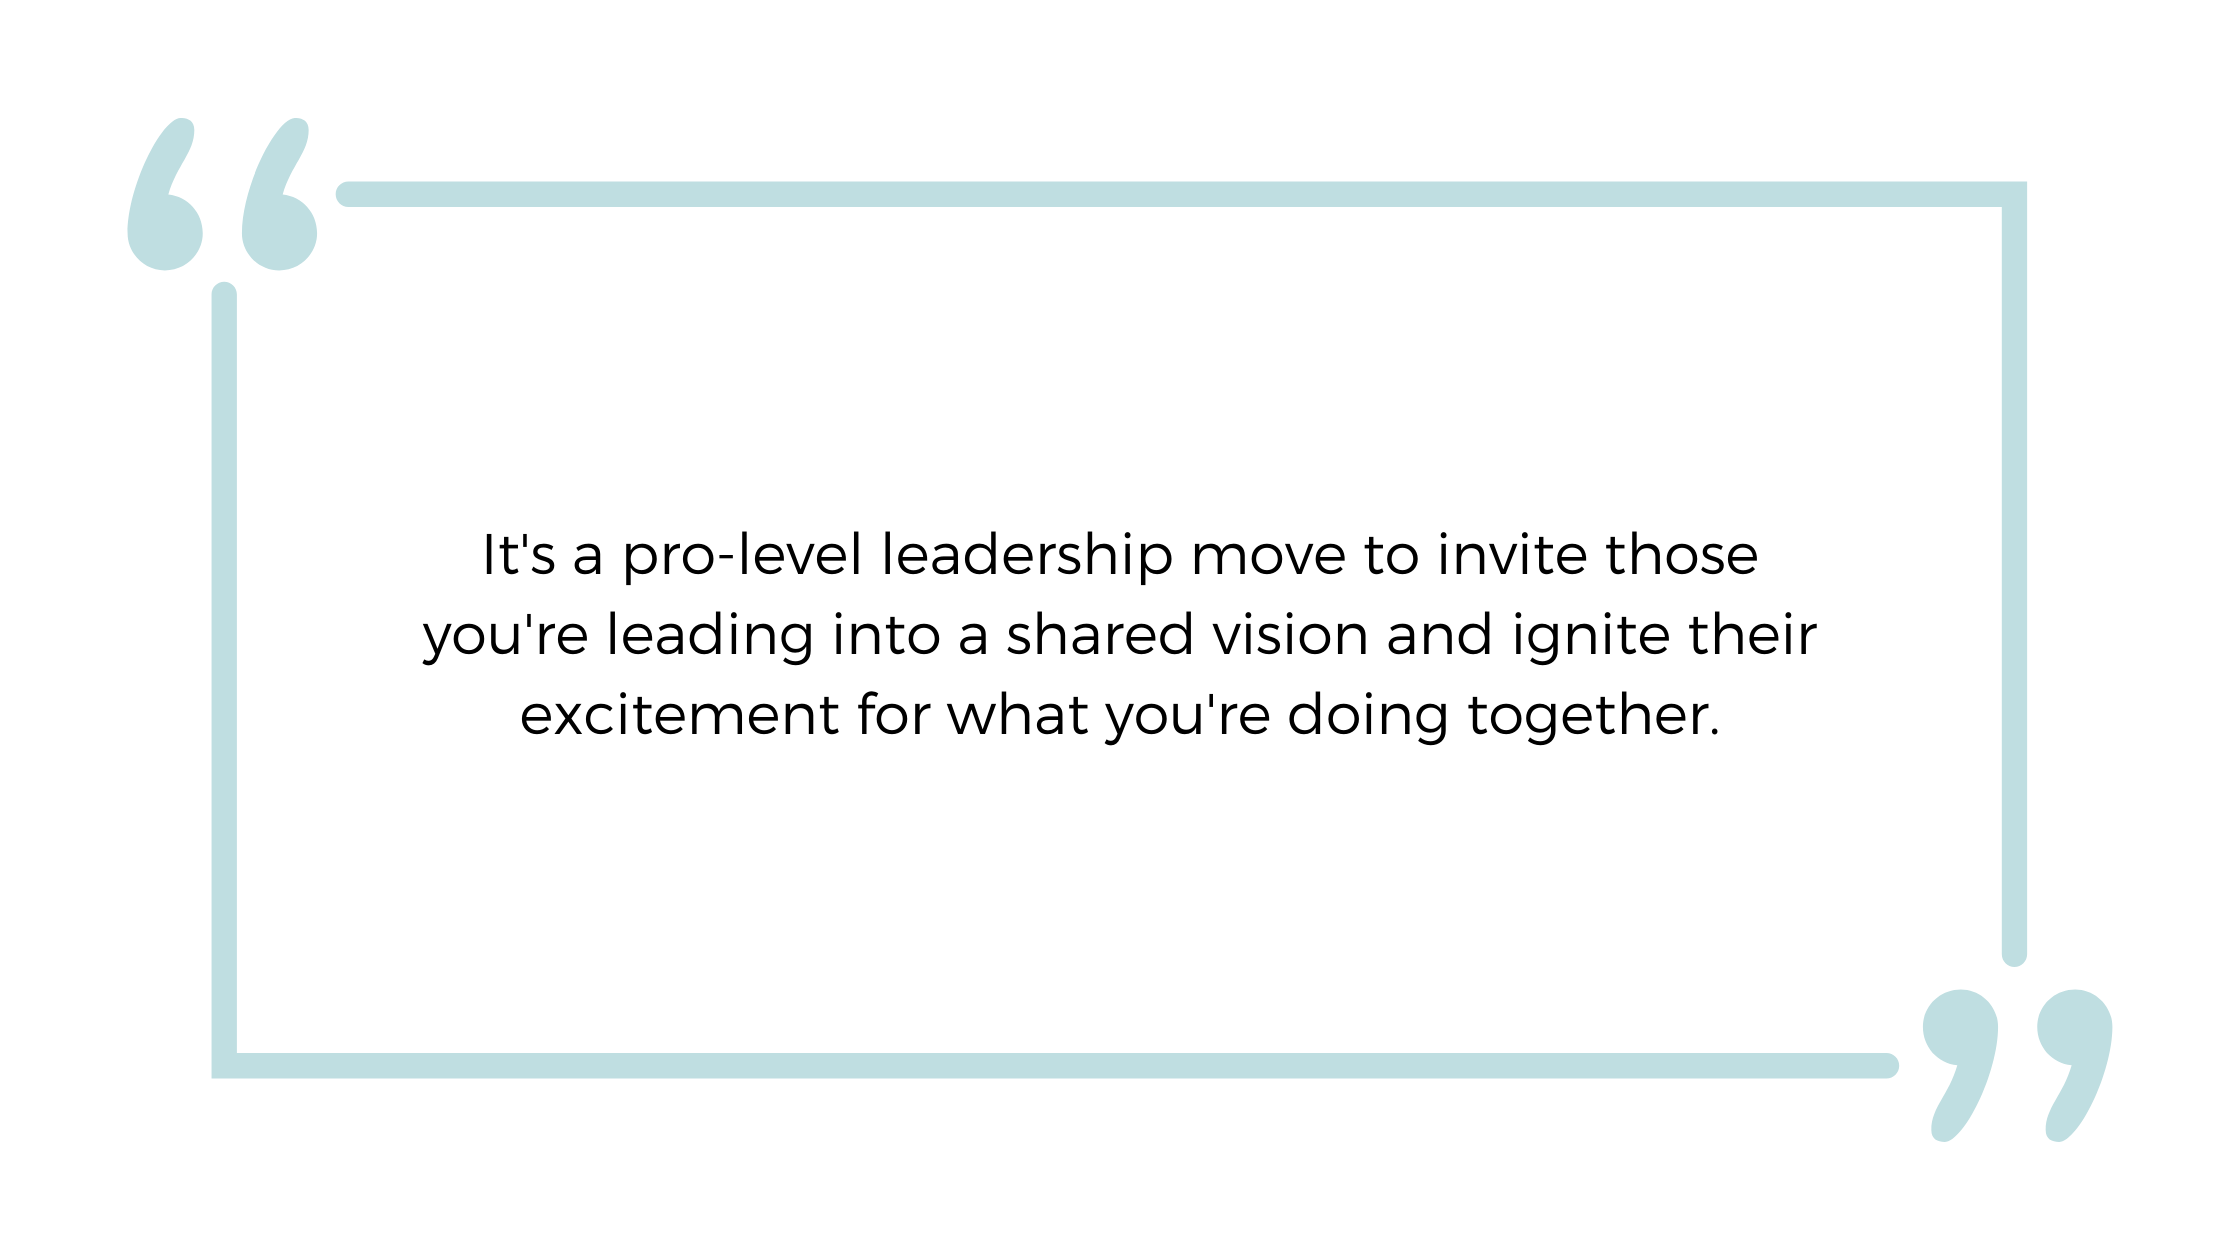 It's a pro-level leadership move to invite those you're leading into a shared vision and ignite their excitement for what you're doing together.